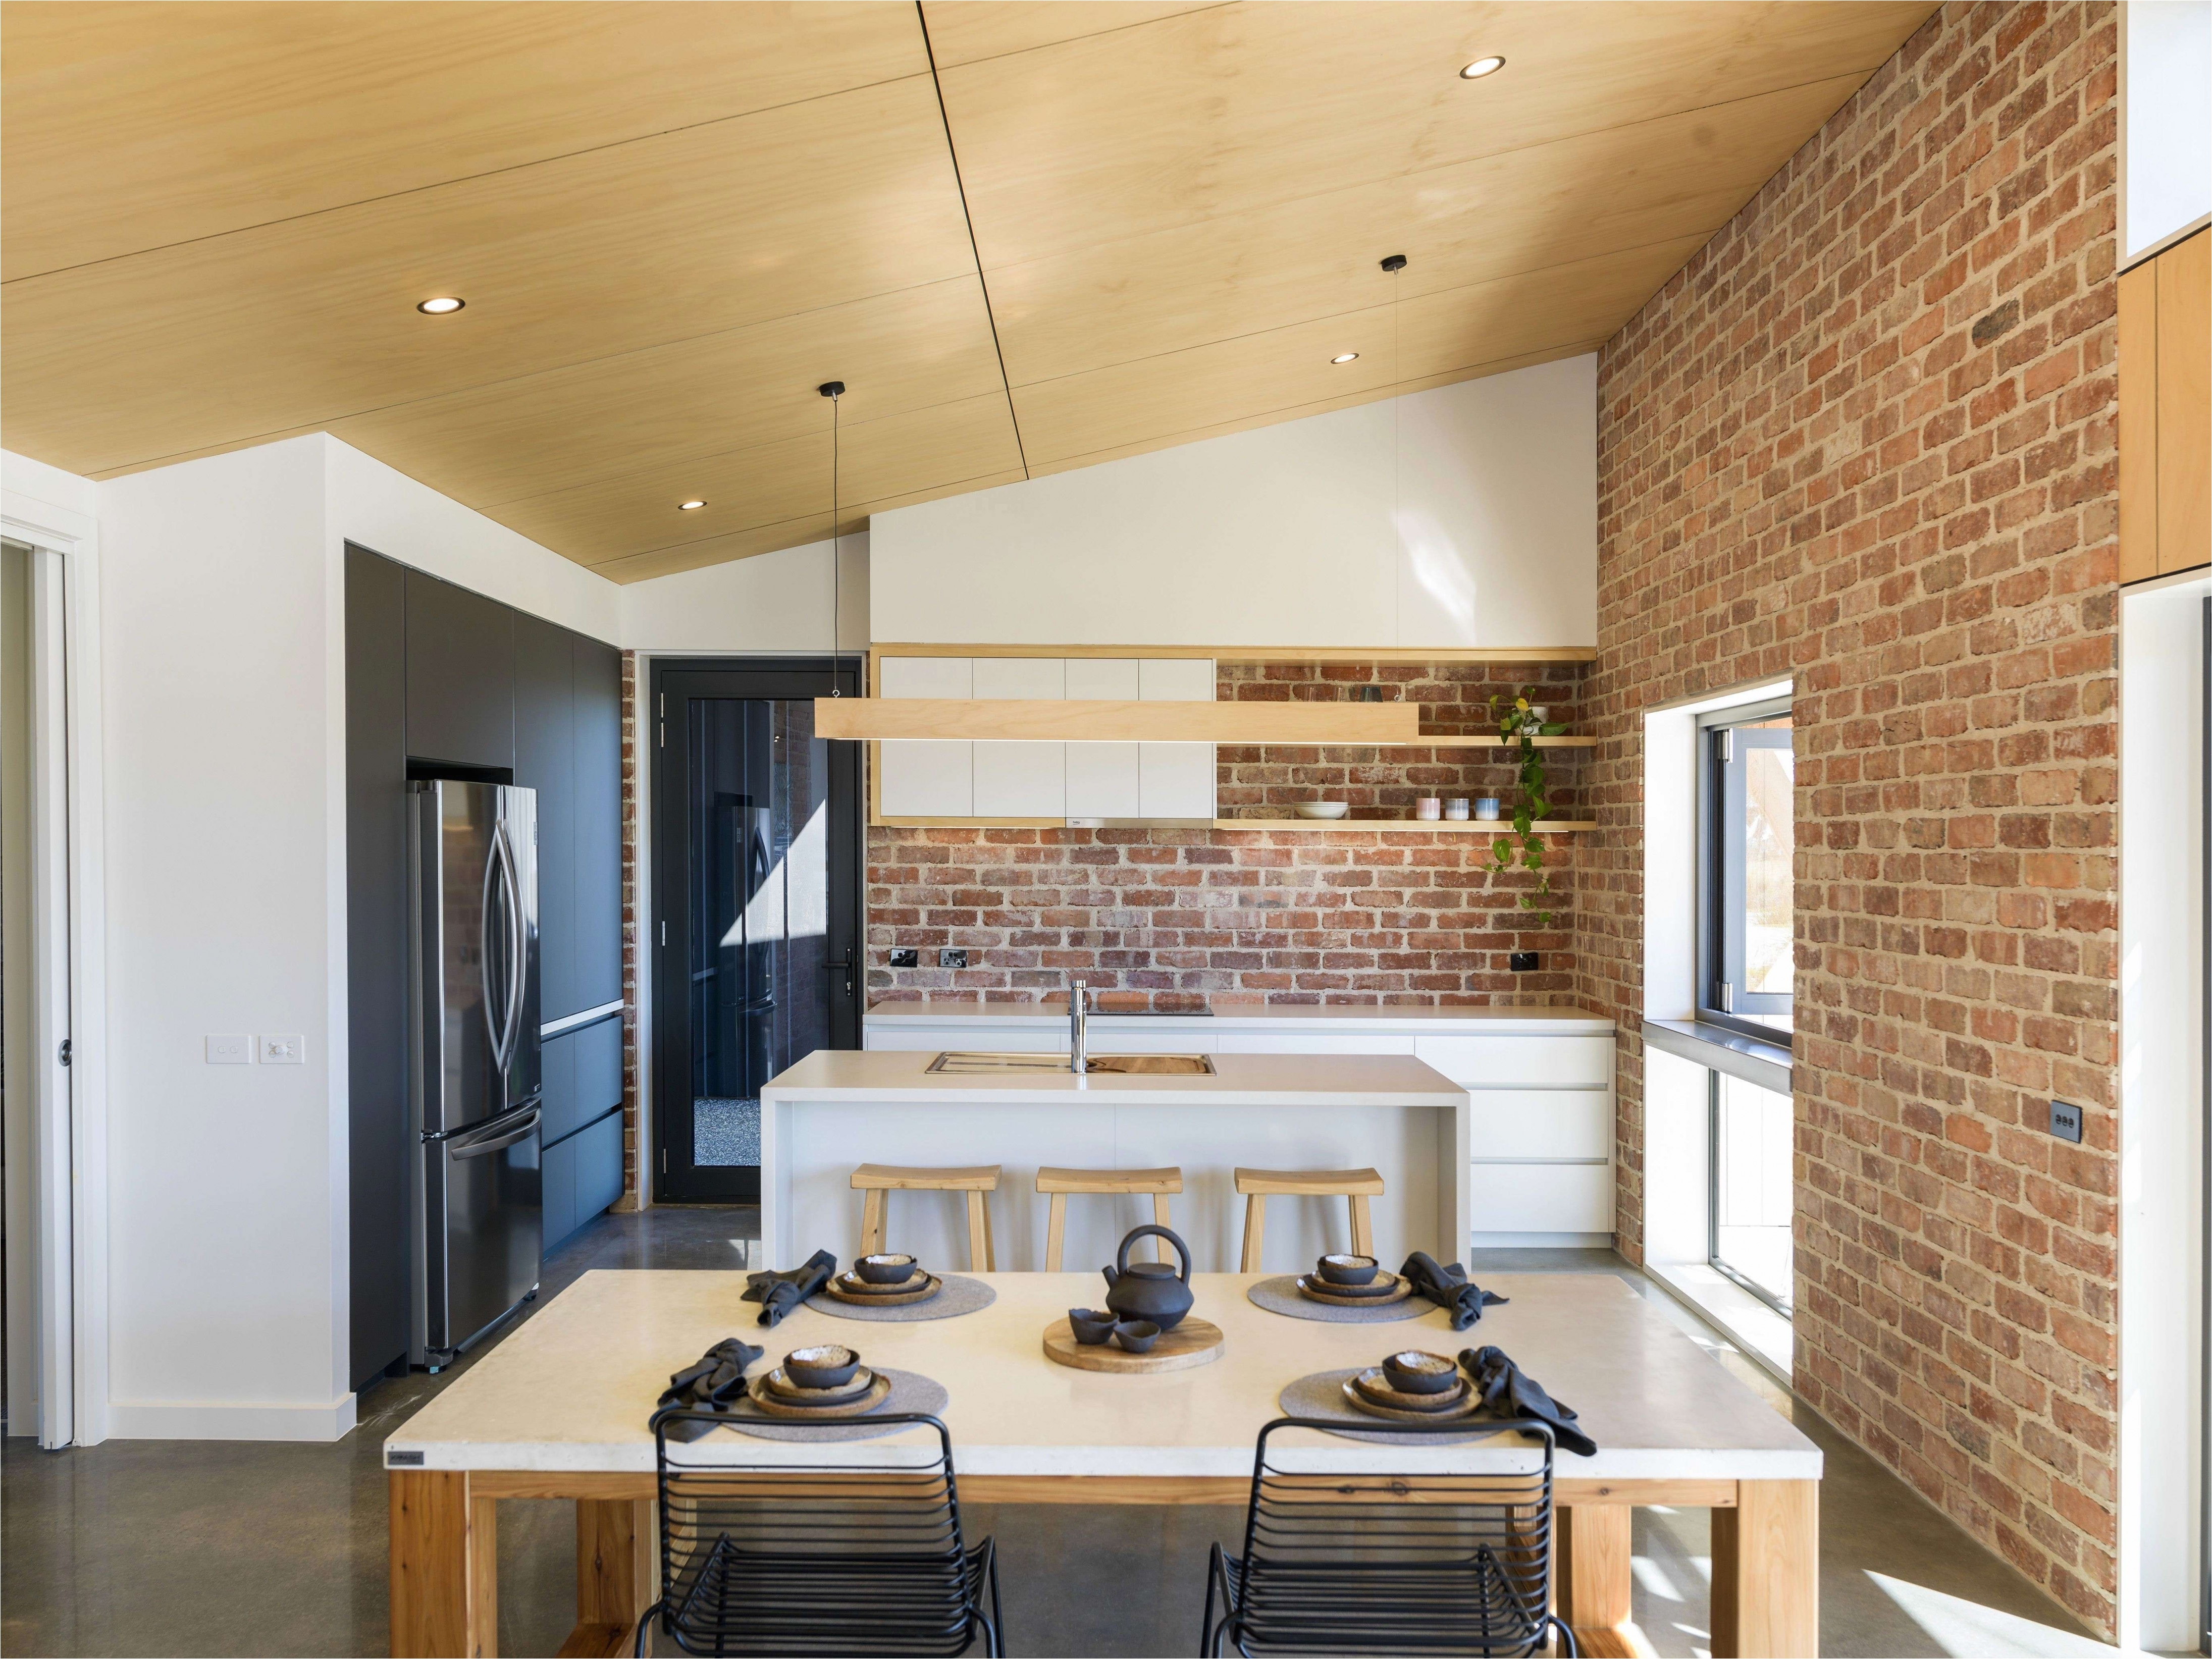 image of brilliant recessed lighting for kitchen ceiling lightscapenetworks